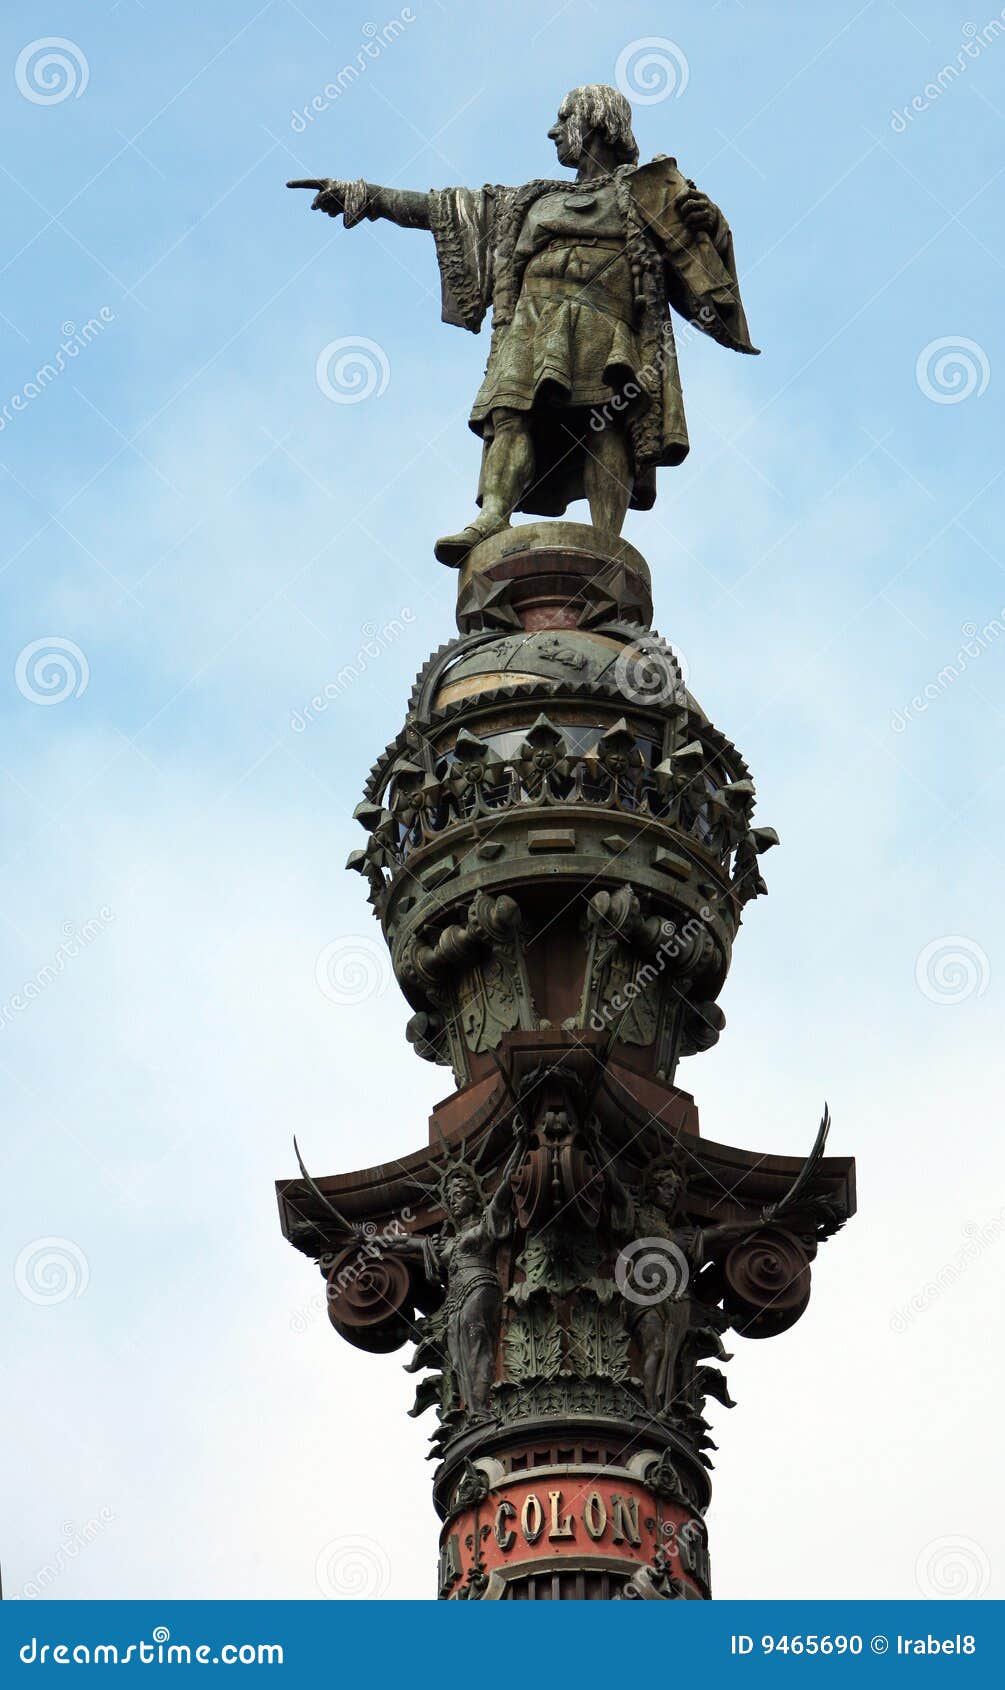 statue of christopher columbus in barcelona